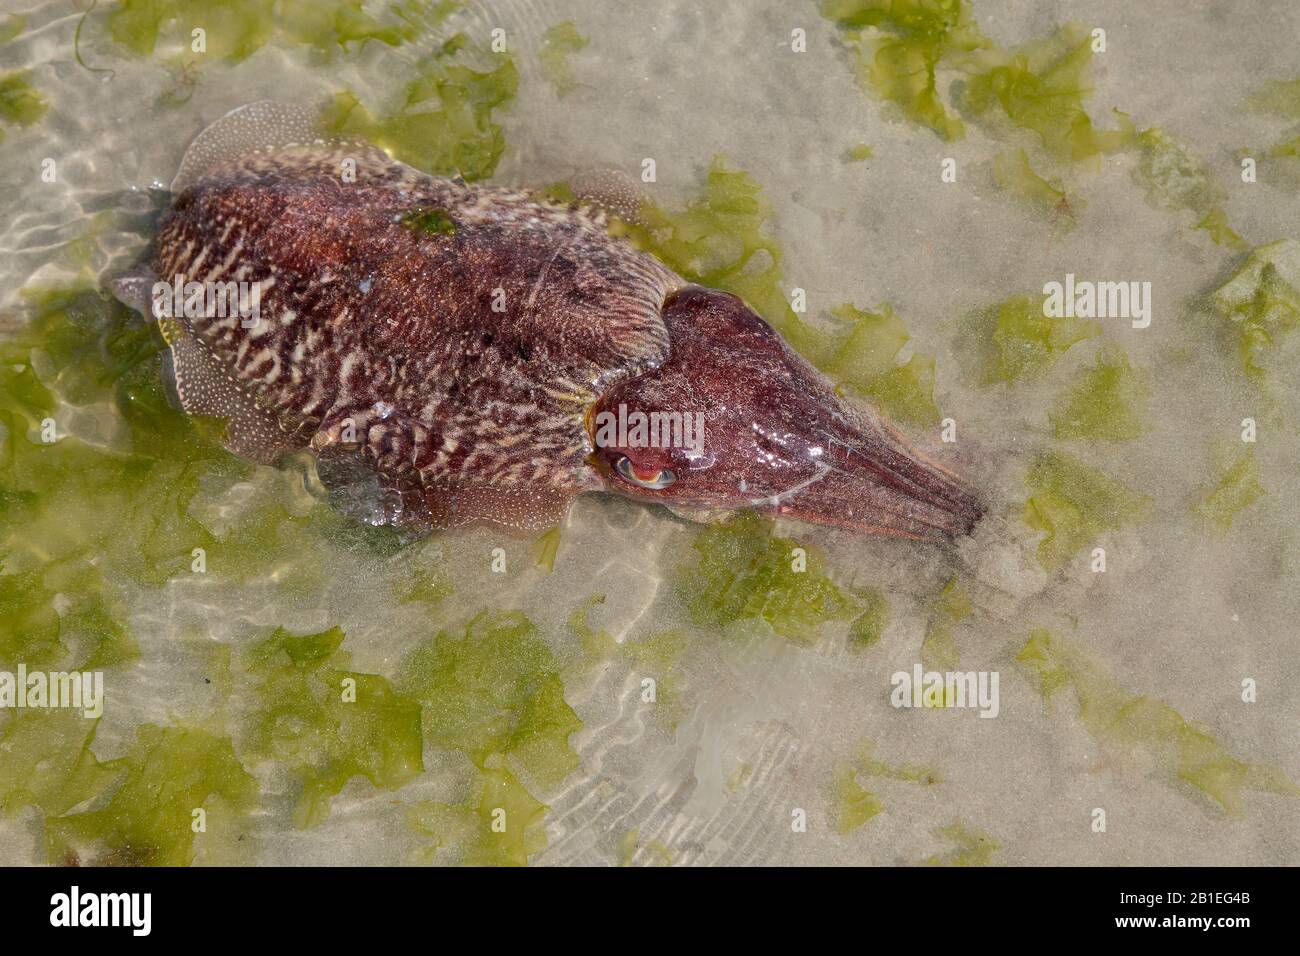 Common Cuttlefish (Sepia officinalis) at low tide in the Jospinet mussels in Planguenoual, Brittany, France Stock Photo